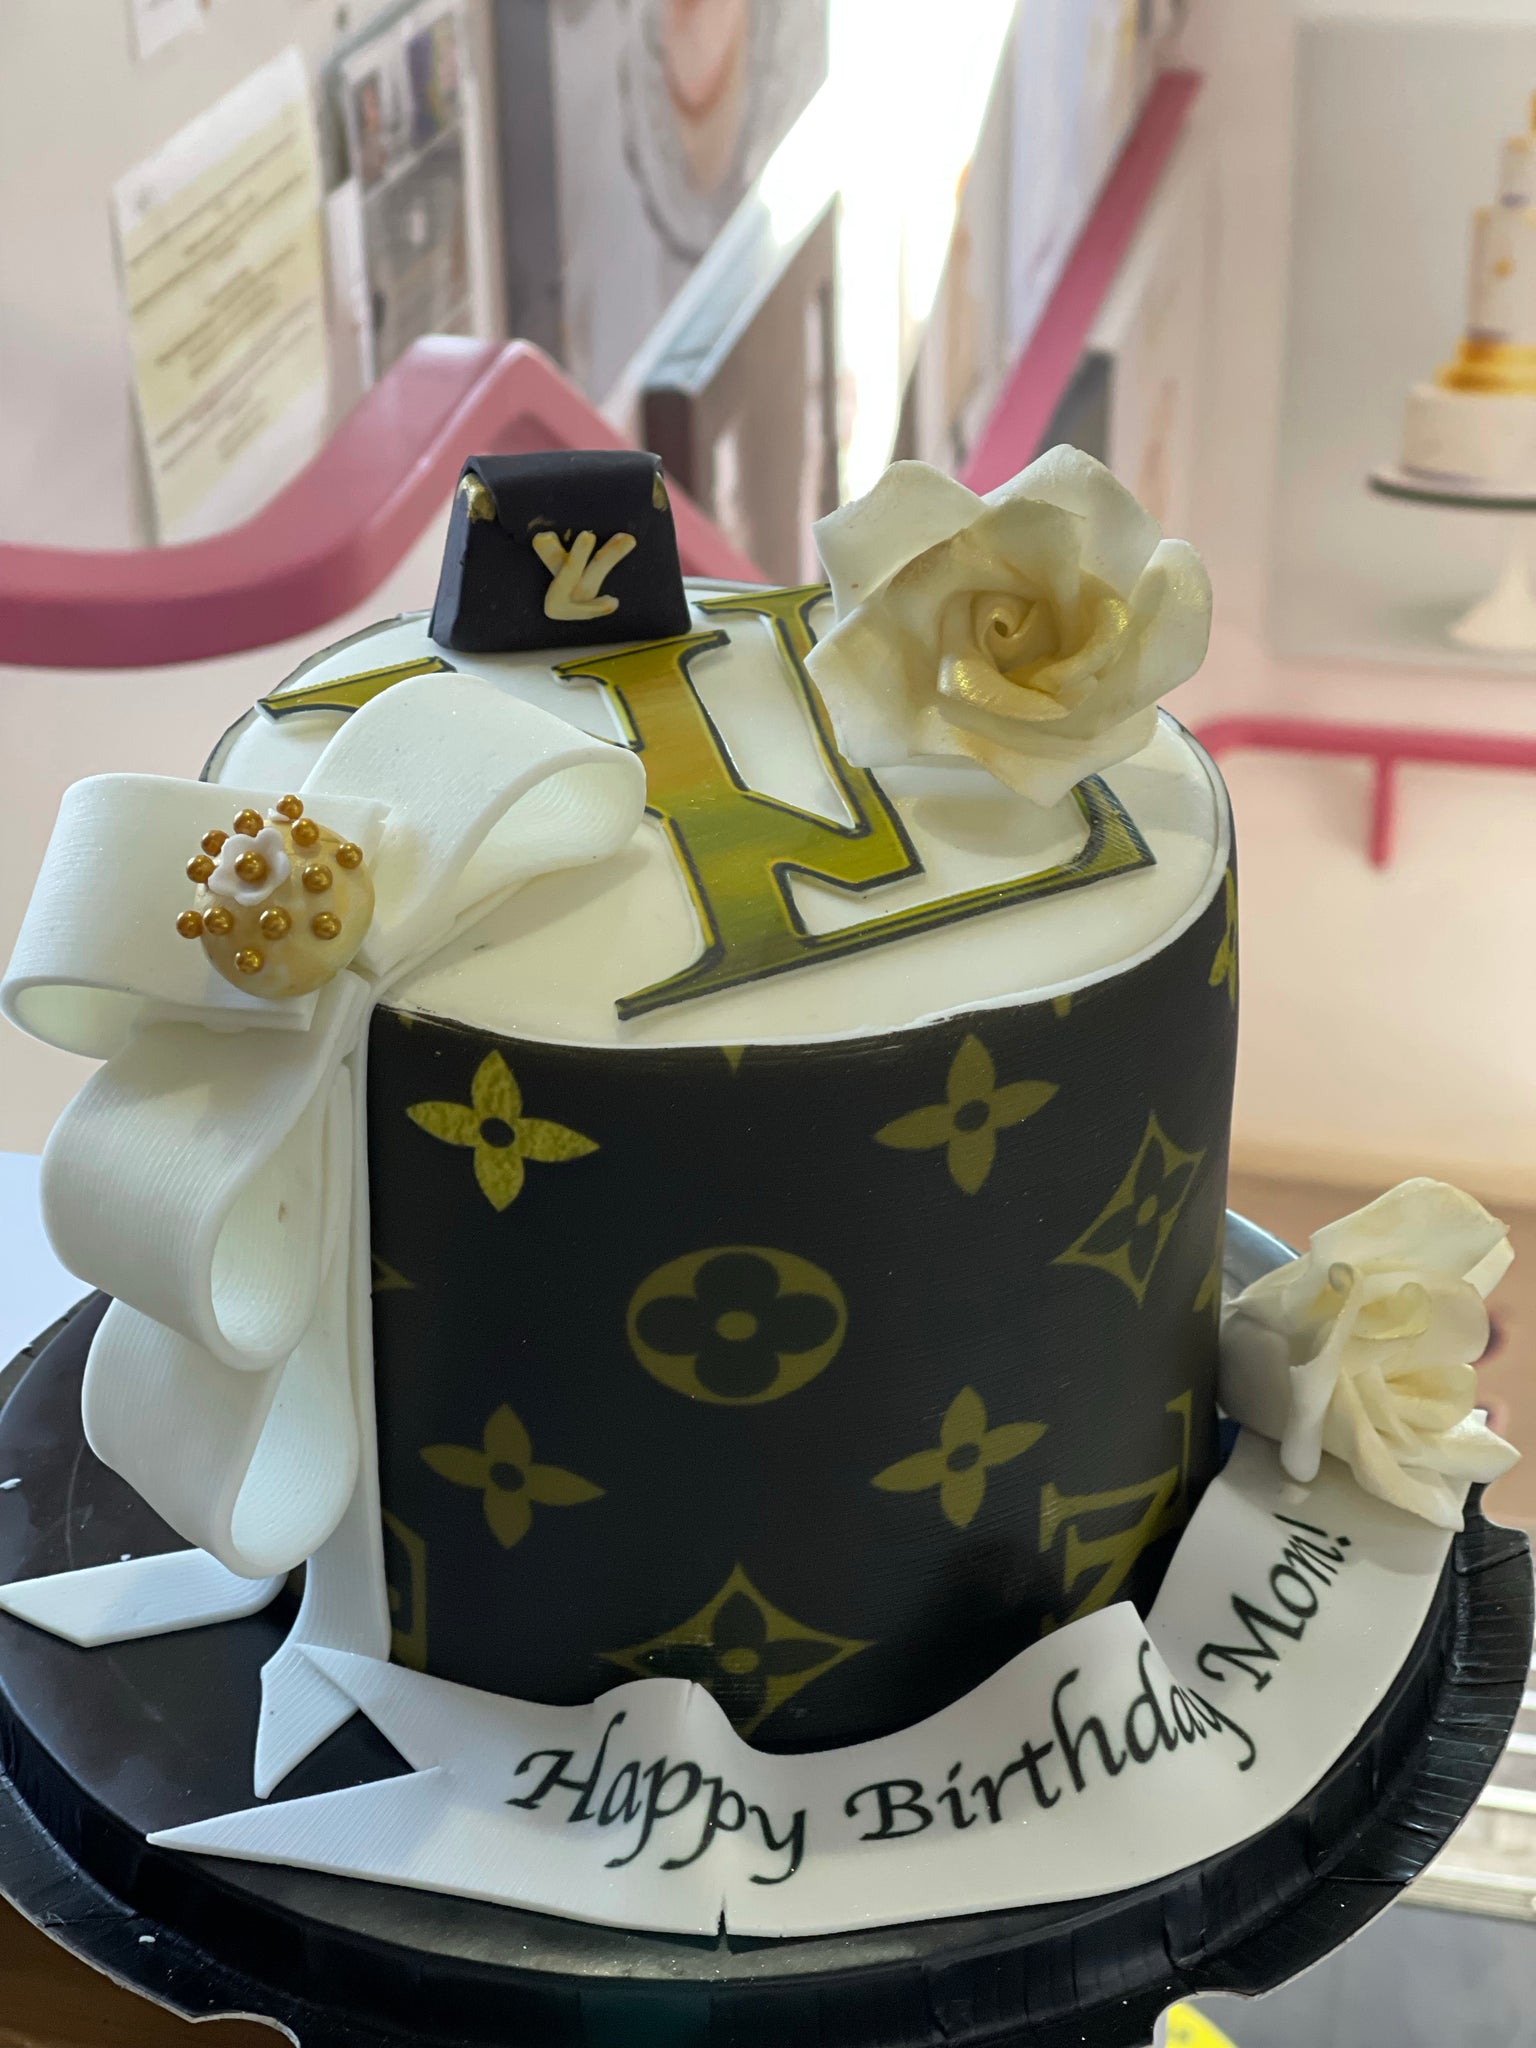 Working on this Customized Louis Vuitton Cake inspired cake